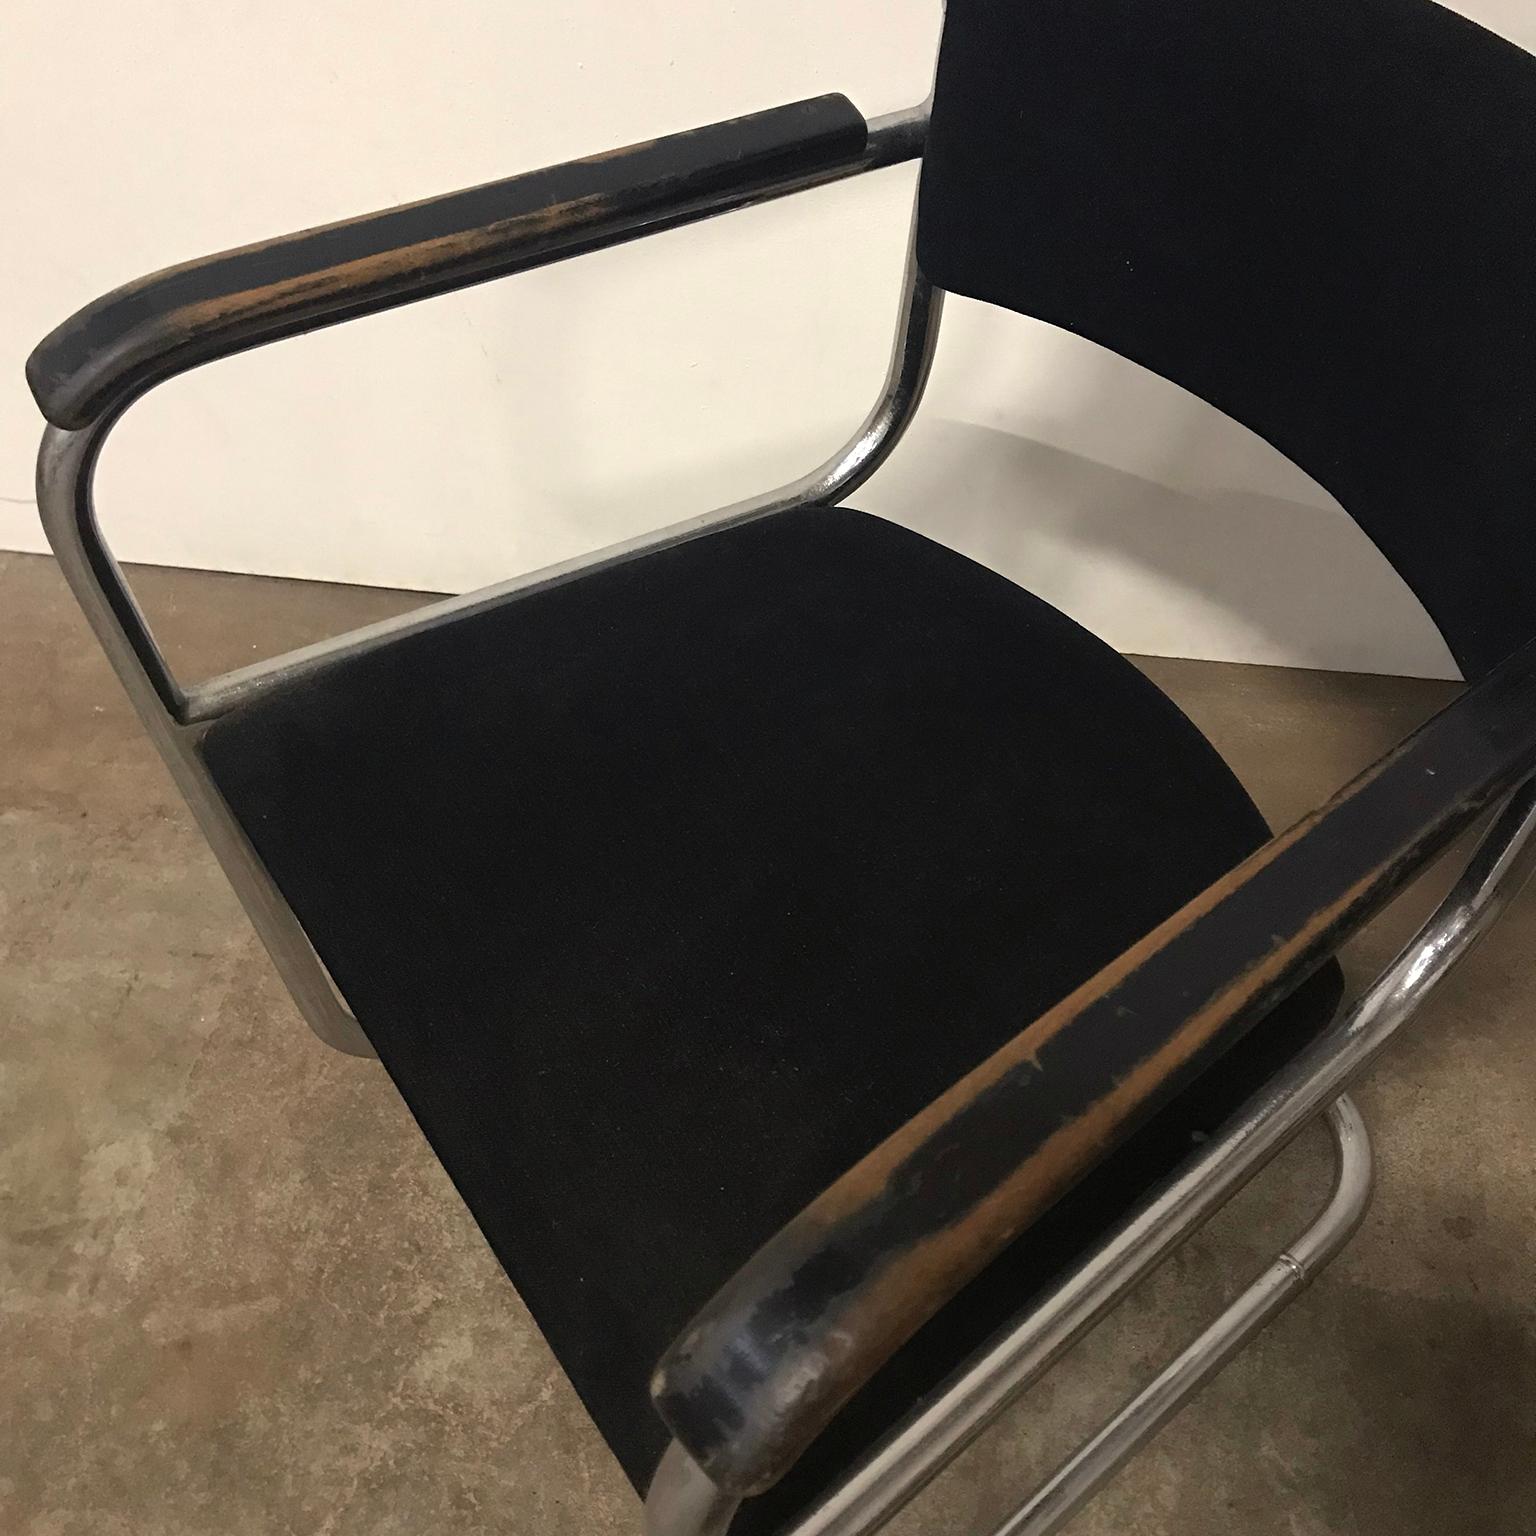 Dutch Design, Set of Original Tubular Chairs with Black Upholstery, circa 1930 For Sale 3